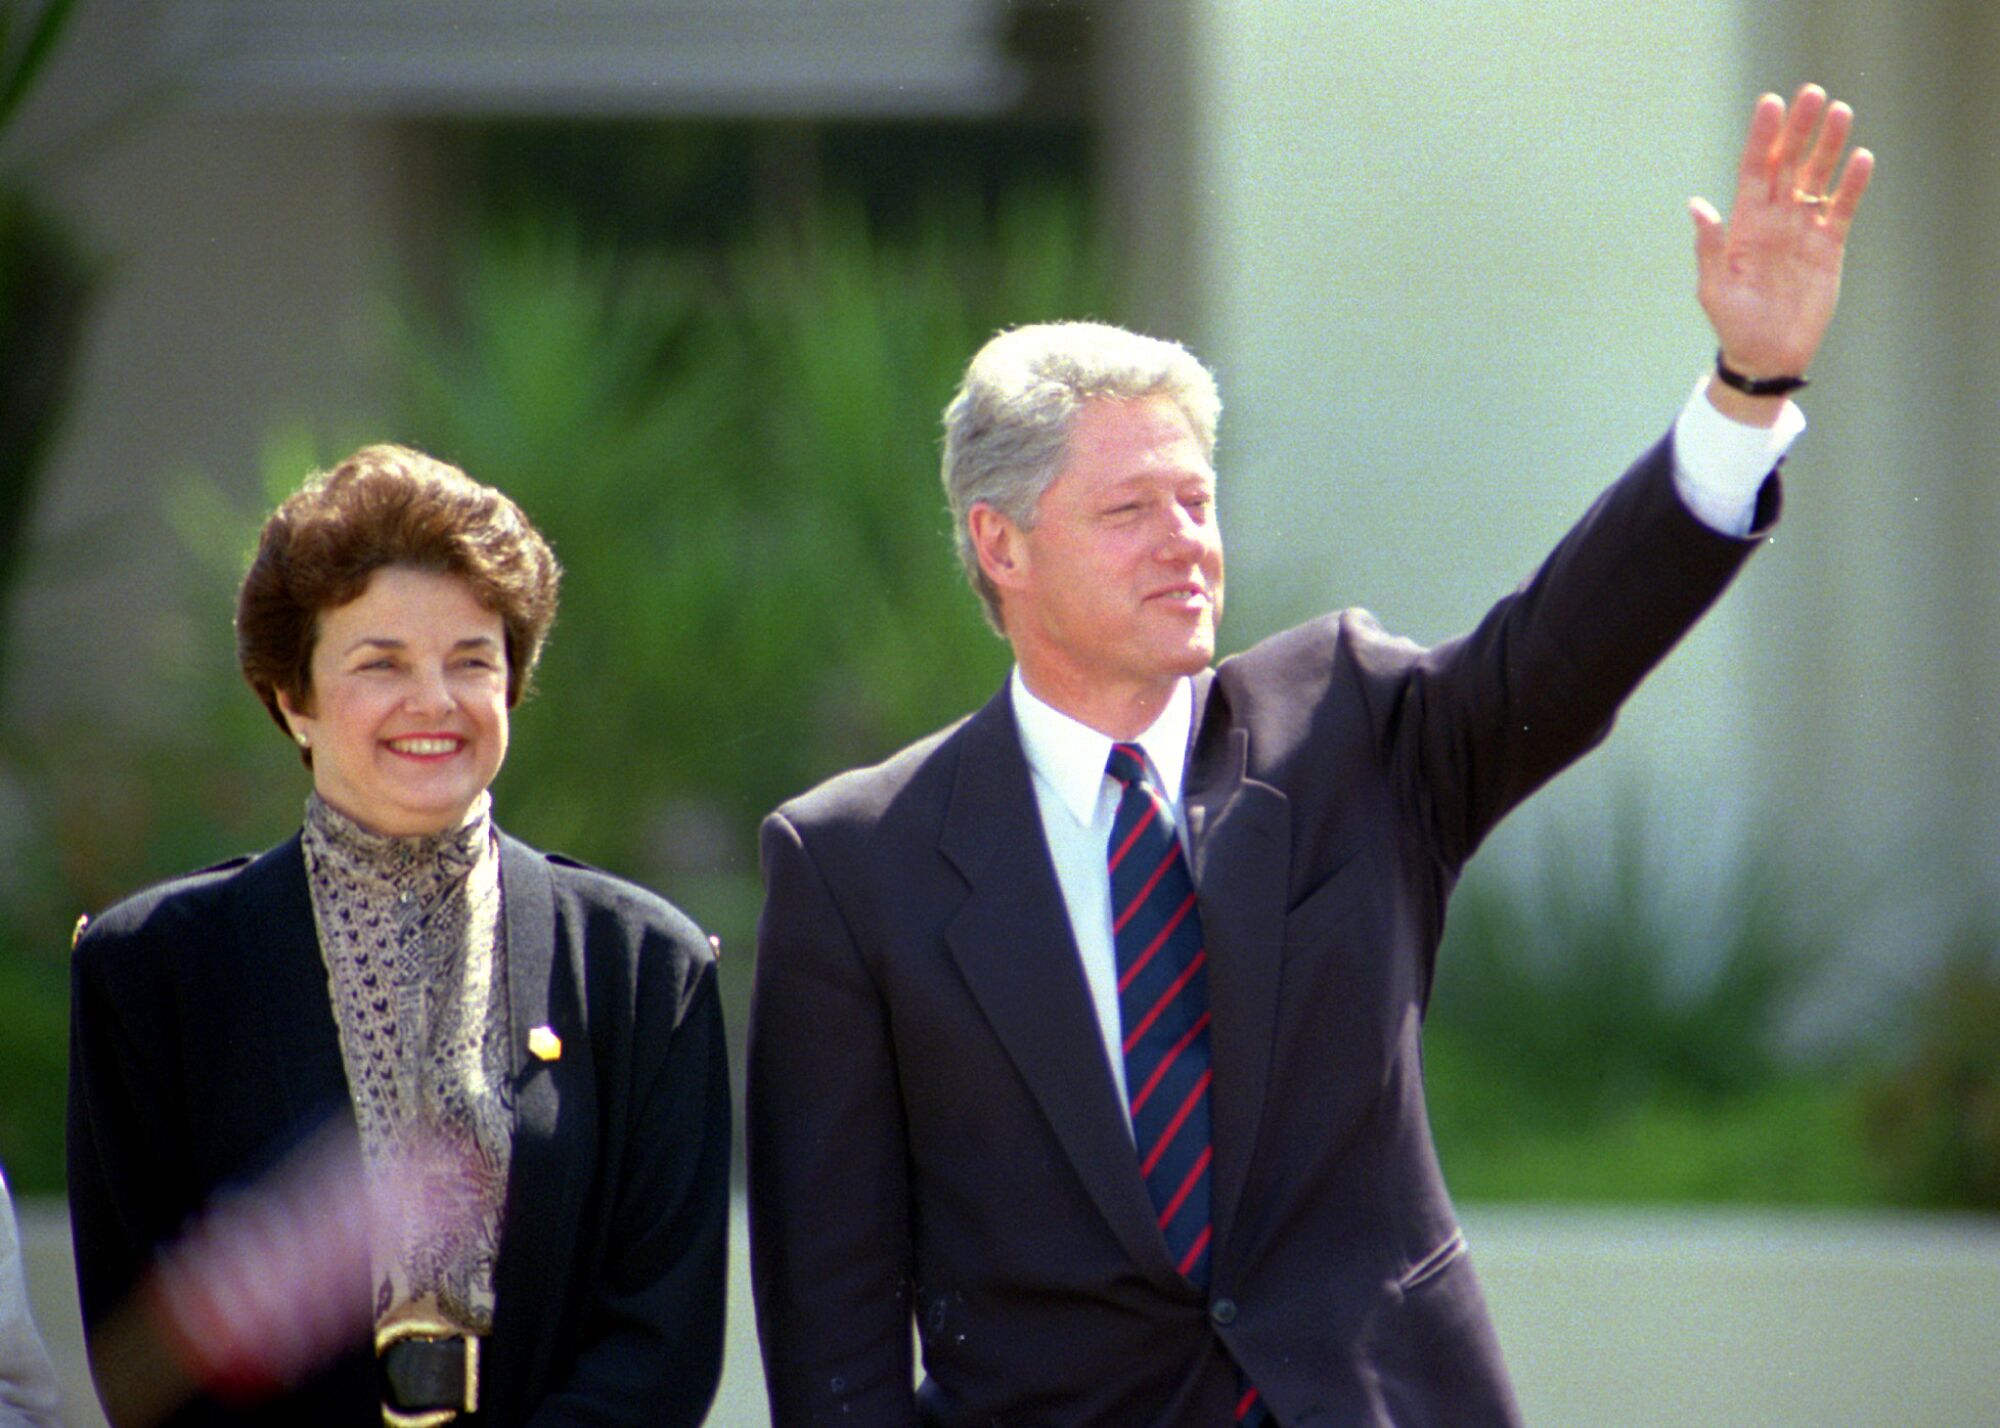 At right, Bill Clinton waves and California Sen. Dianne Feinstein stands at left, both smiling. 